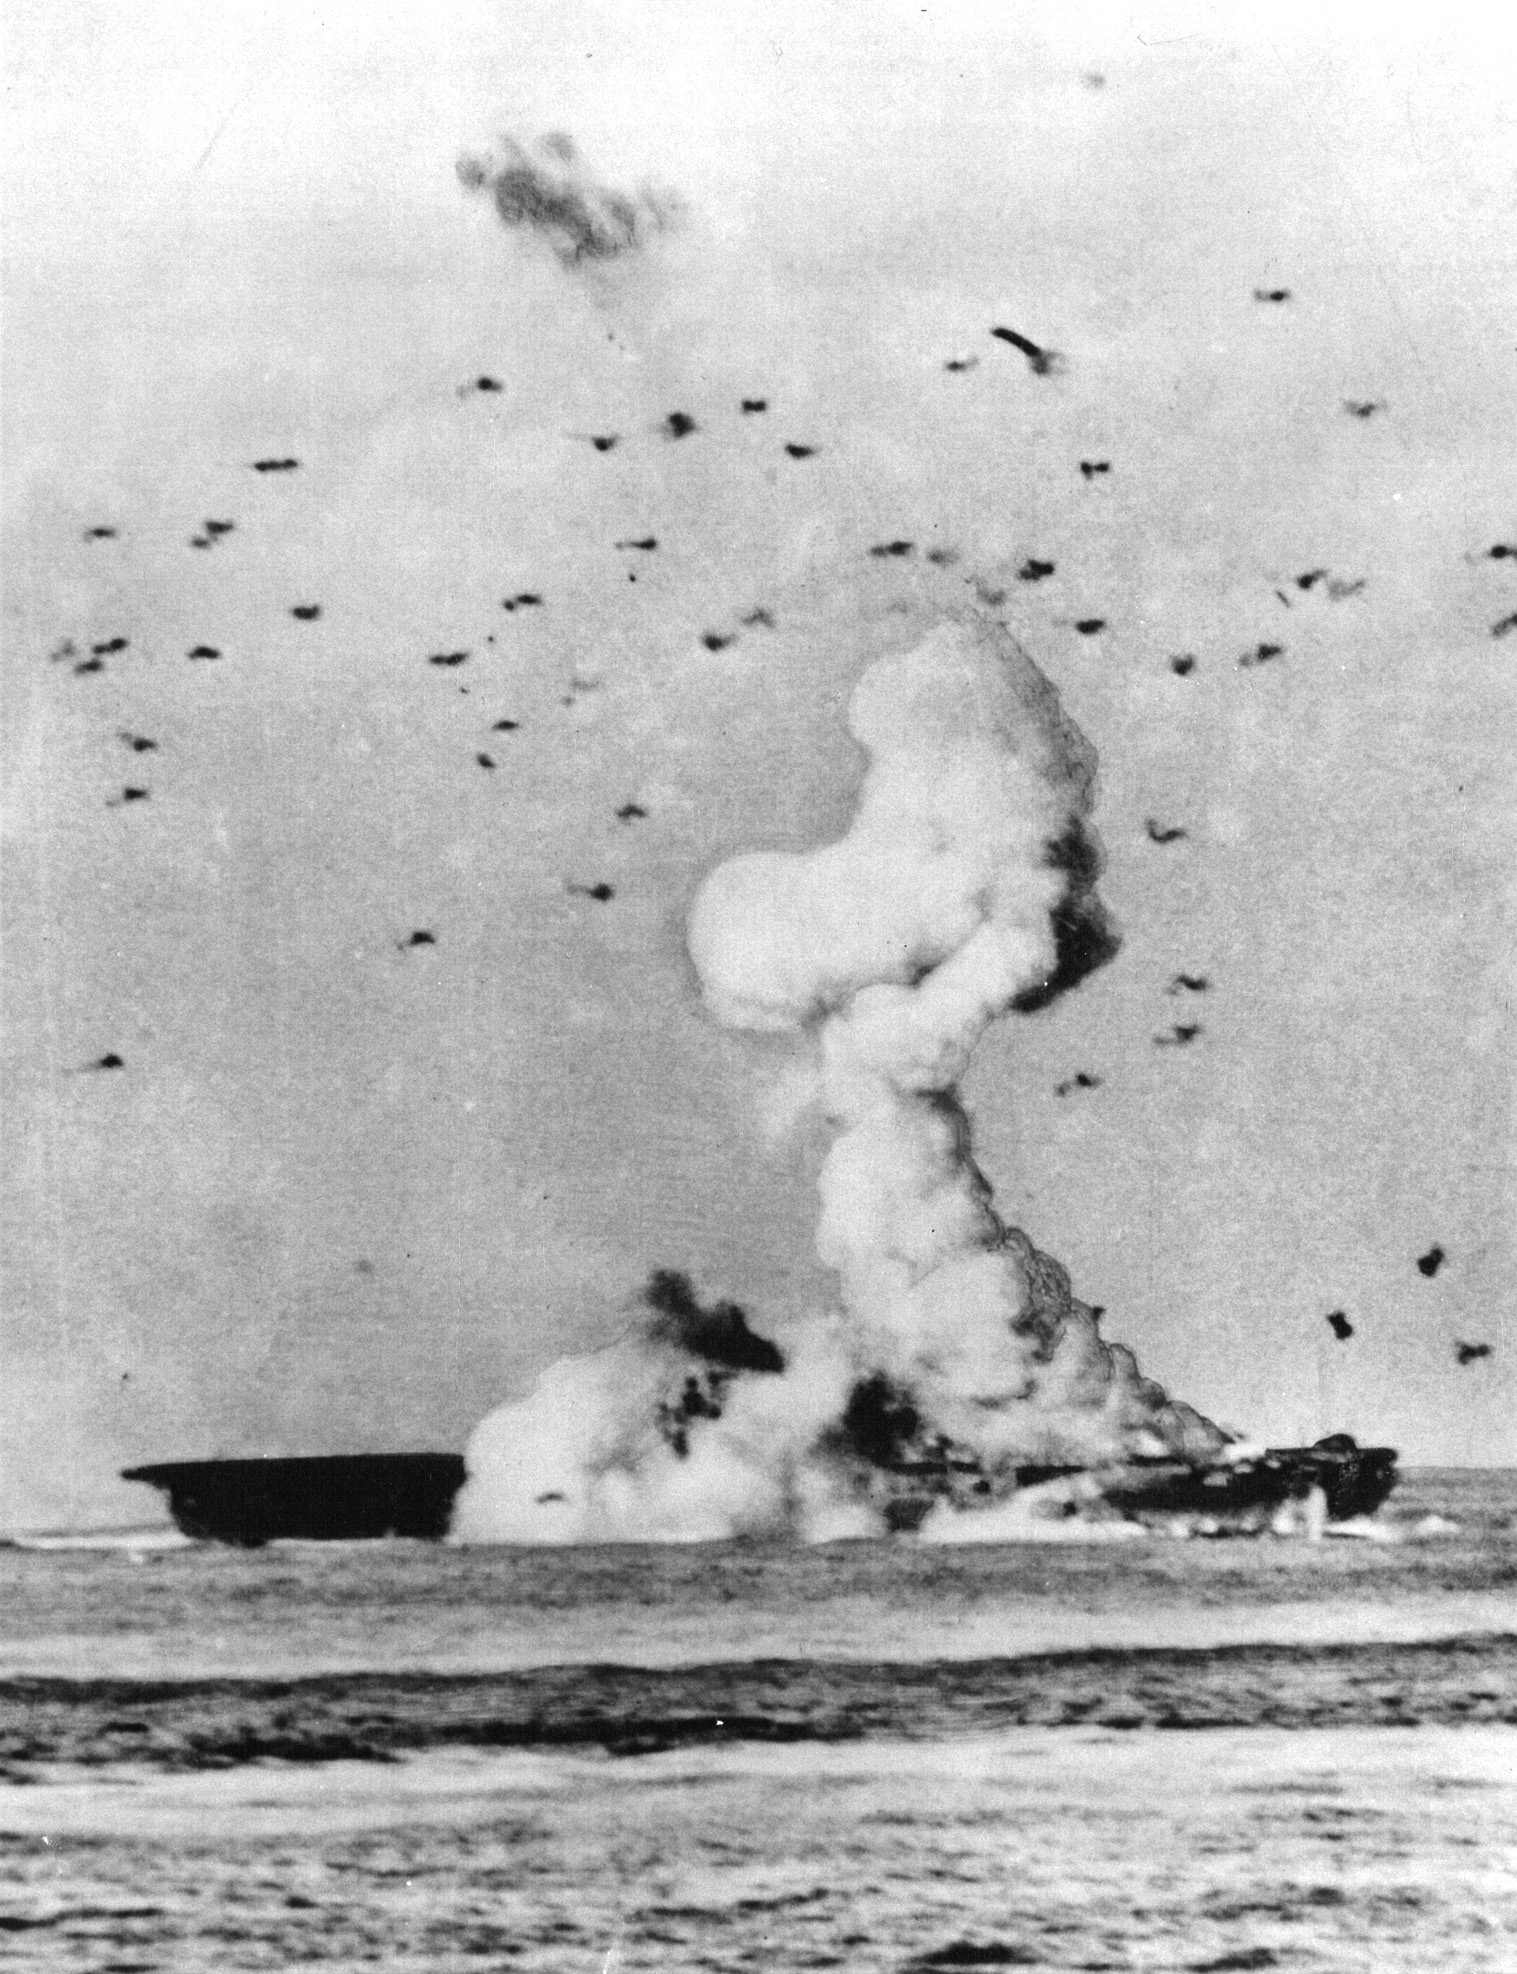 Navy photographer William Barr snapped this dramatic moment as a kamikaze exploded on the flight deck of the USS Enterprise, May 14, 1945. 